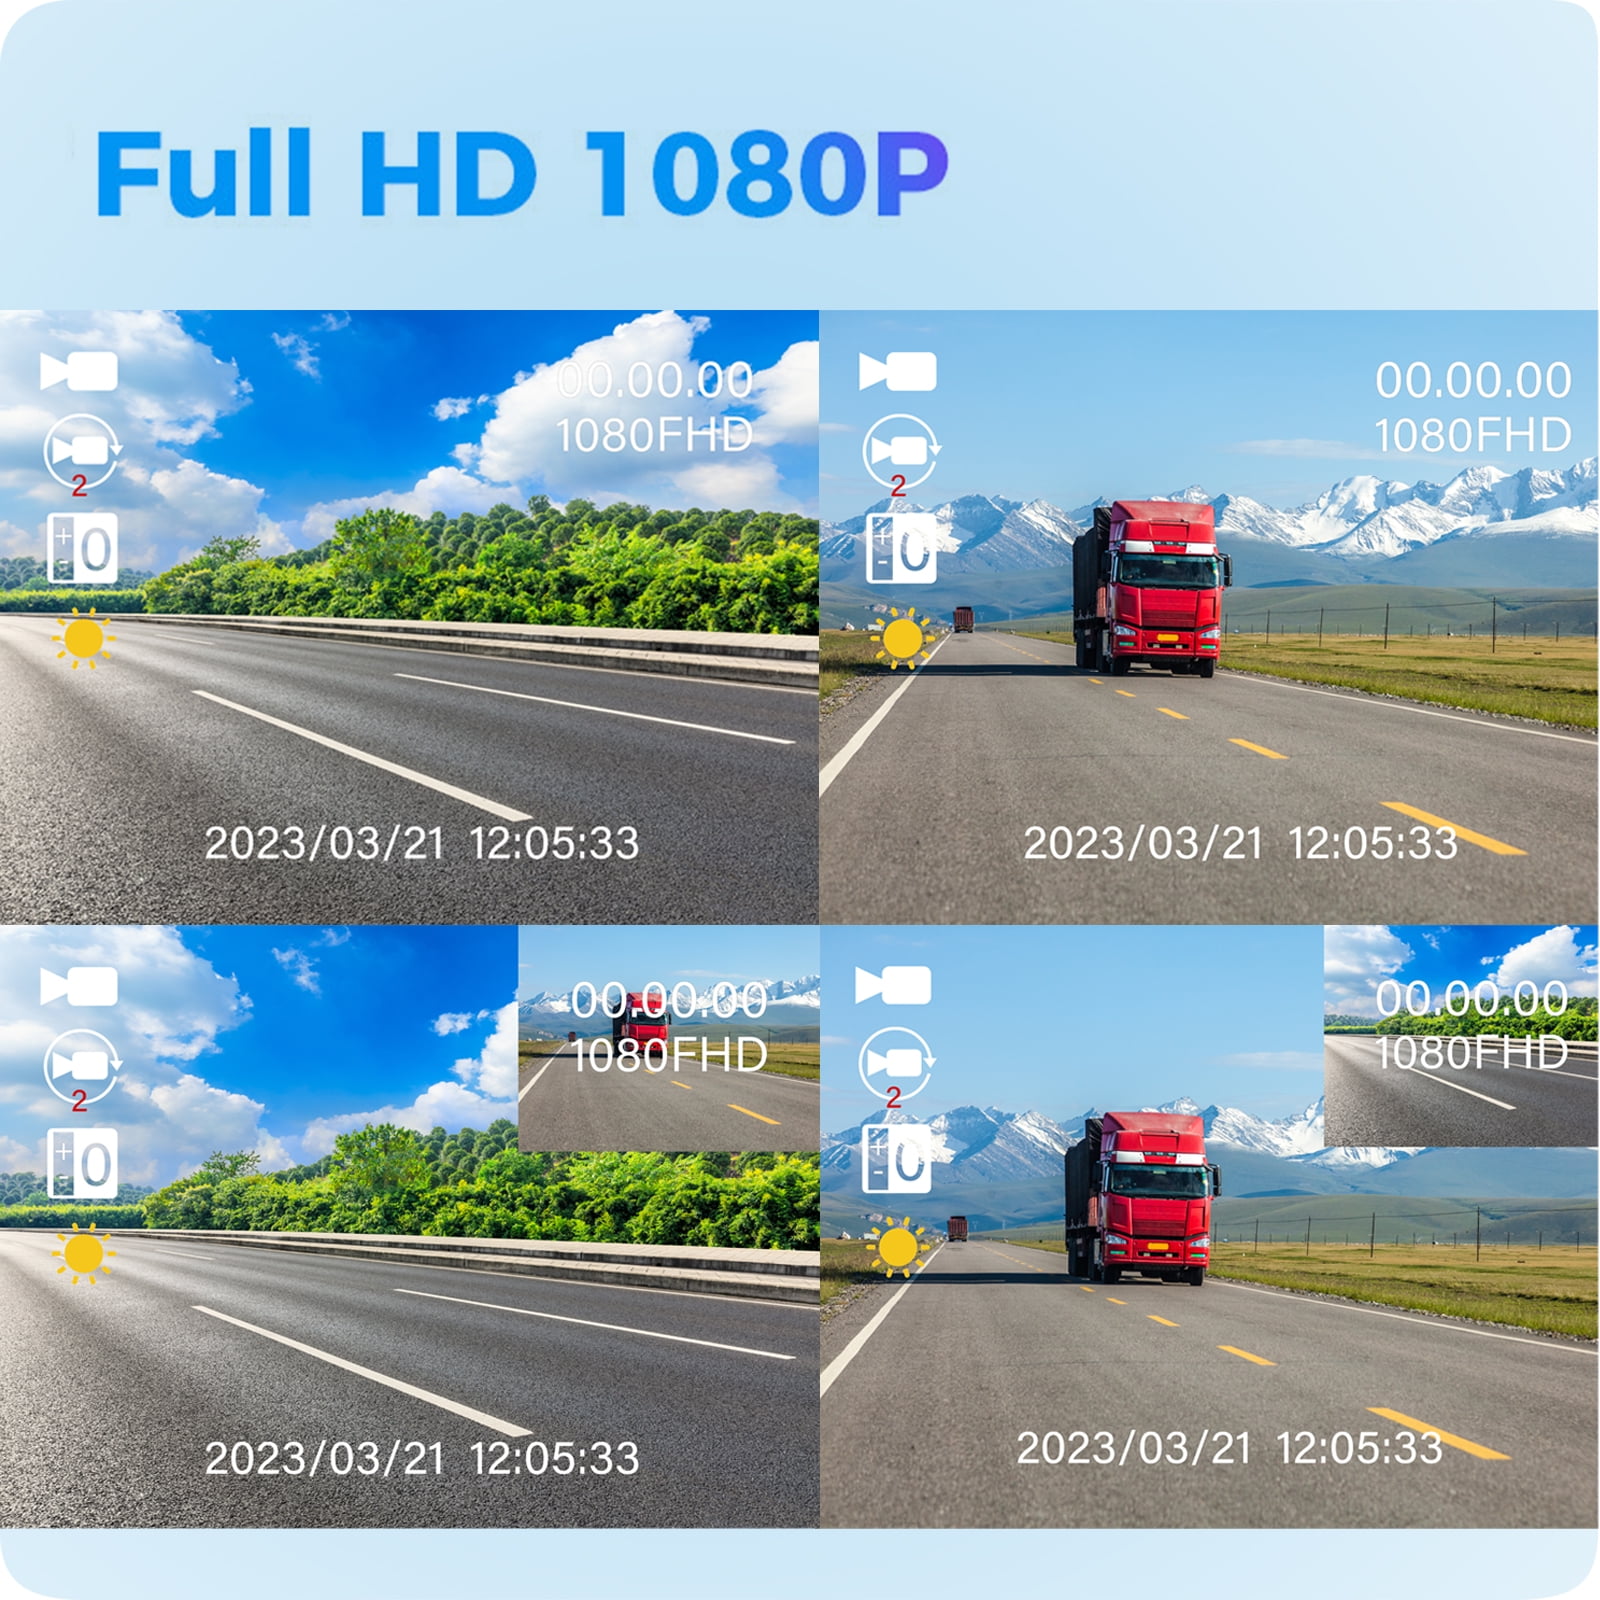 Dash Cam 3 Channel Front and Rear Inside,32GB Free SD Card 2.0 Inch IPS  Screen,1080P Dash Camera for Car with IR Night Vision,170°Wide Angle,Loop  Recording,Parking Mode - Yahoo Shopping